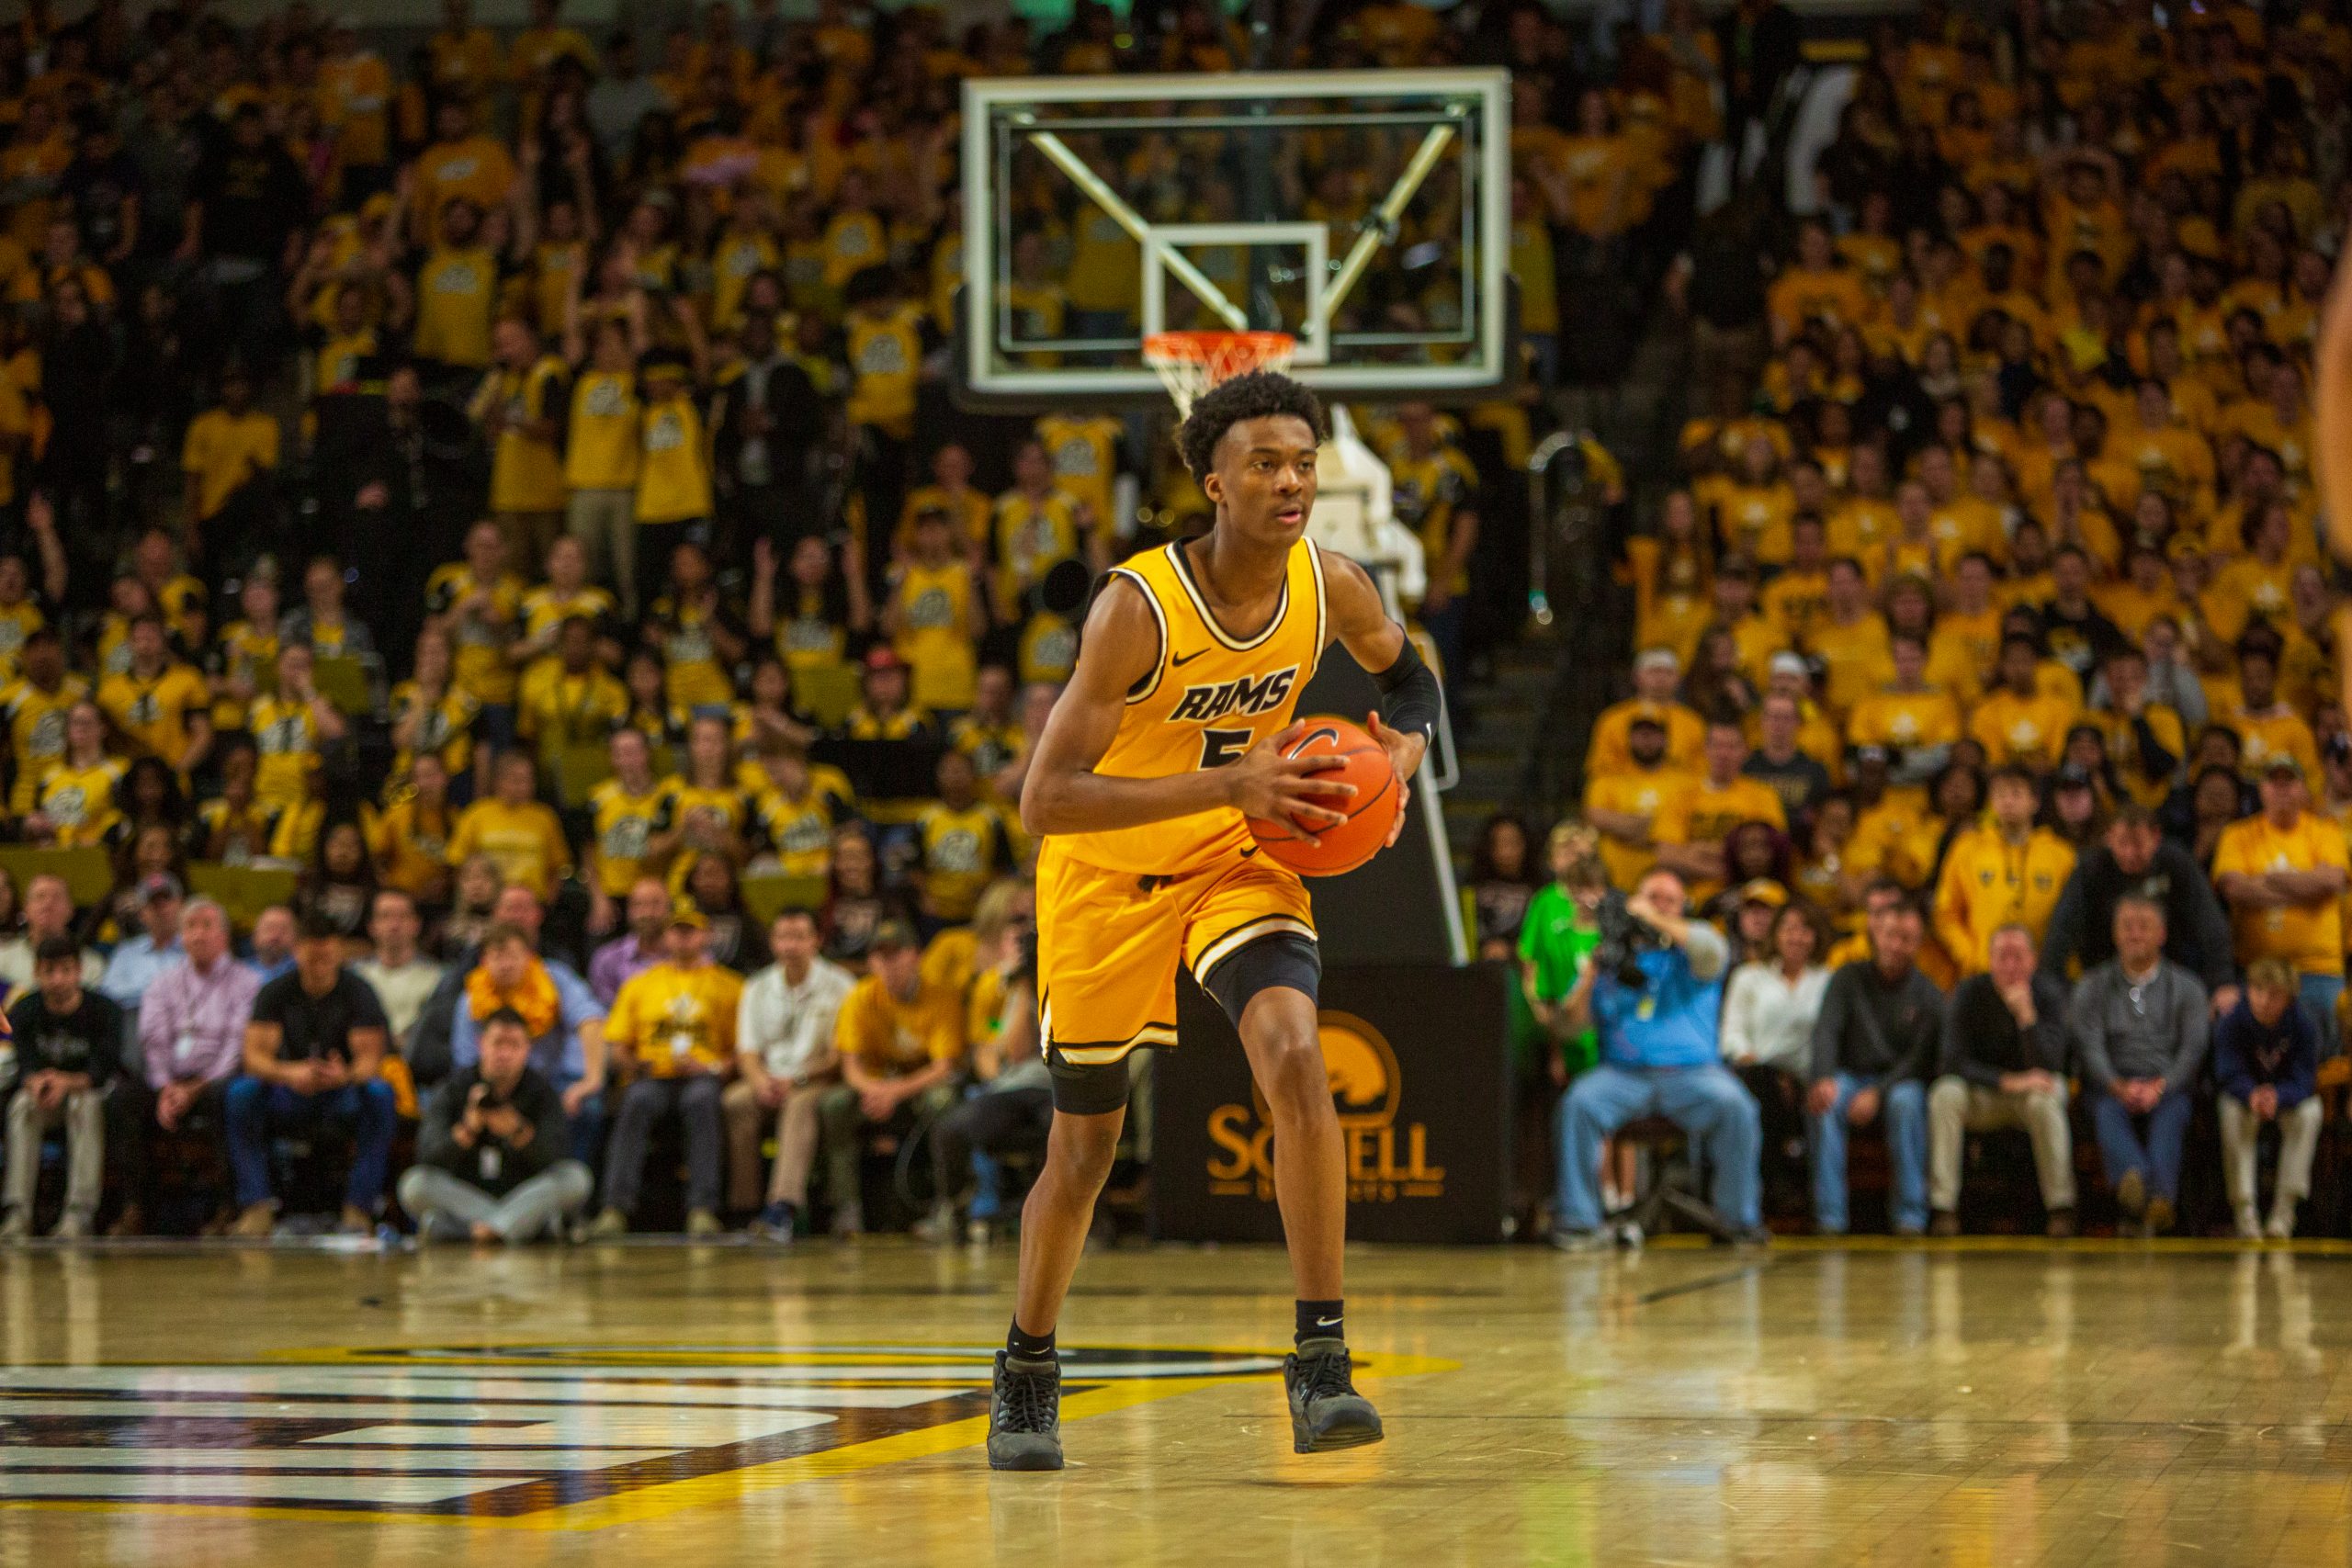 Hyland becomes third first round draft pick in VCU men's basketball history